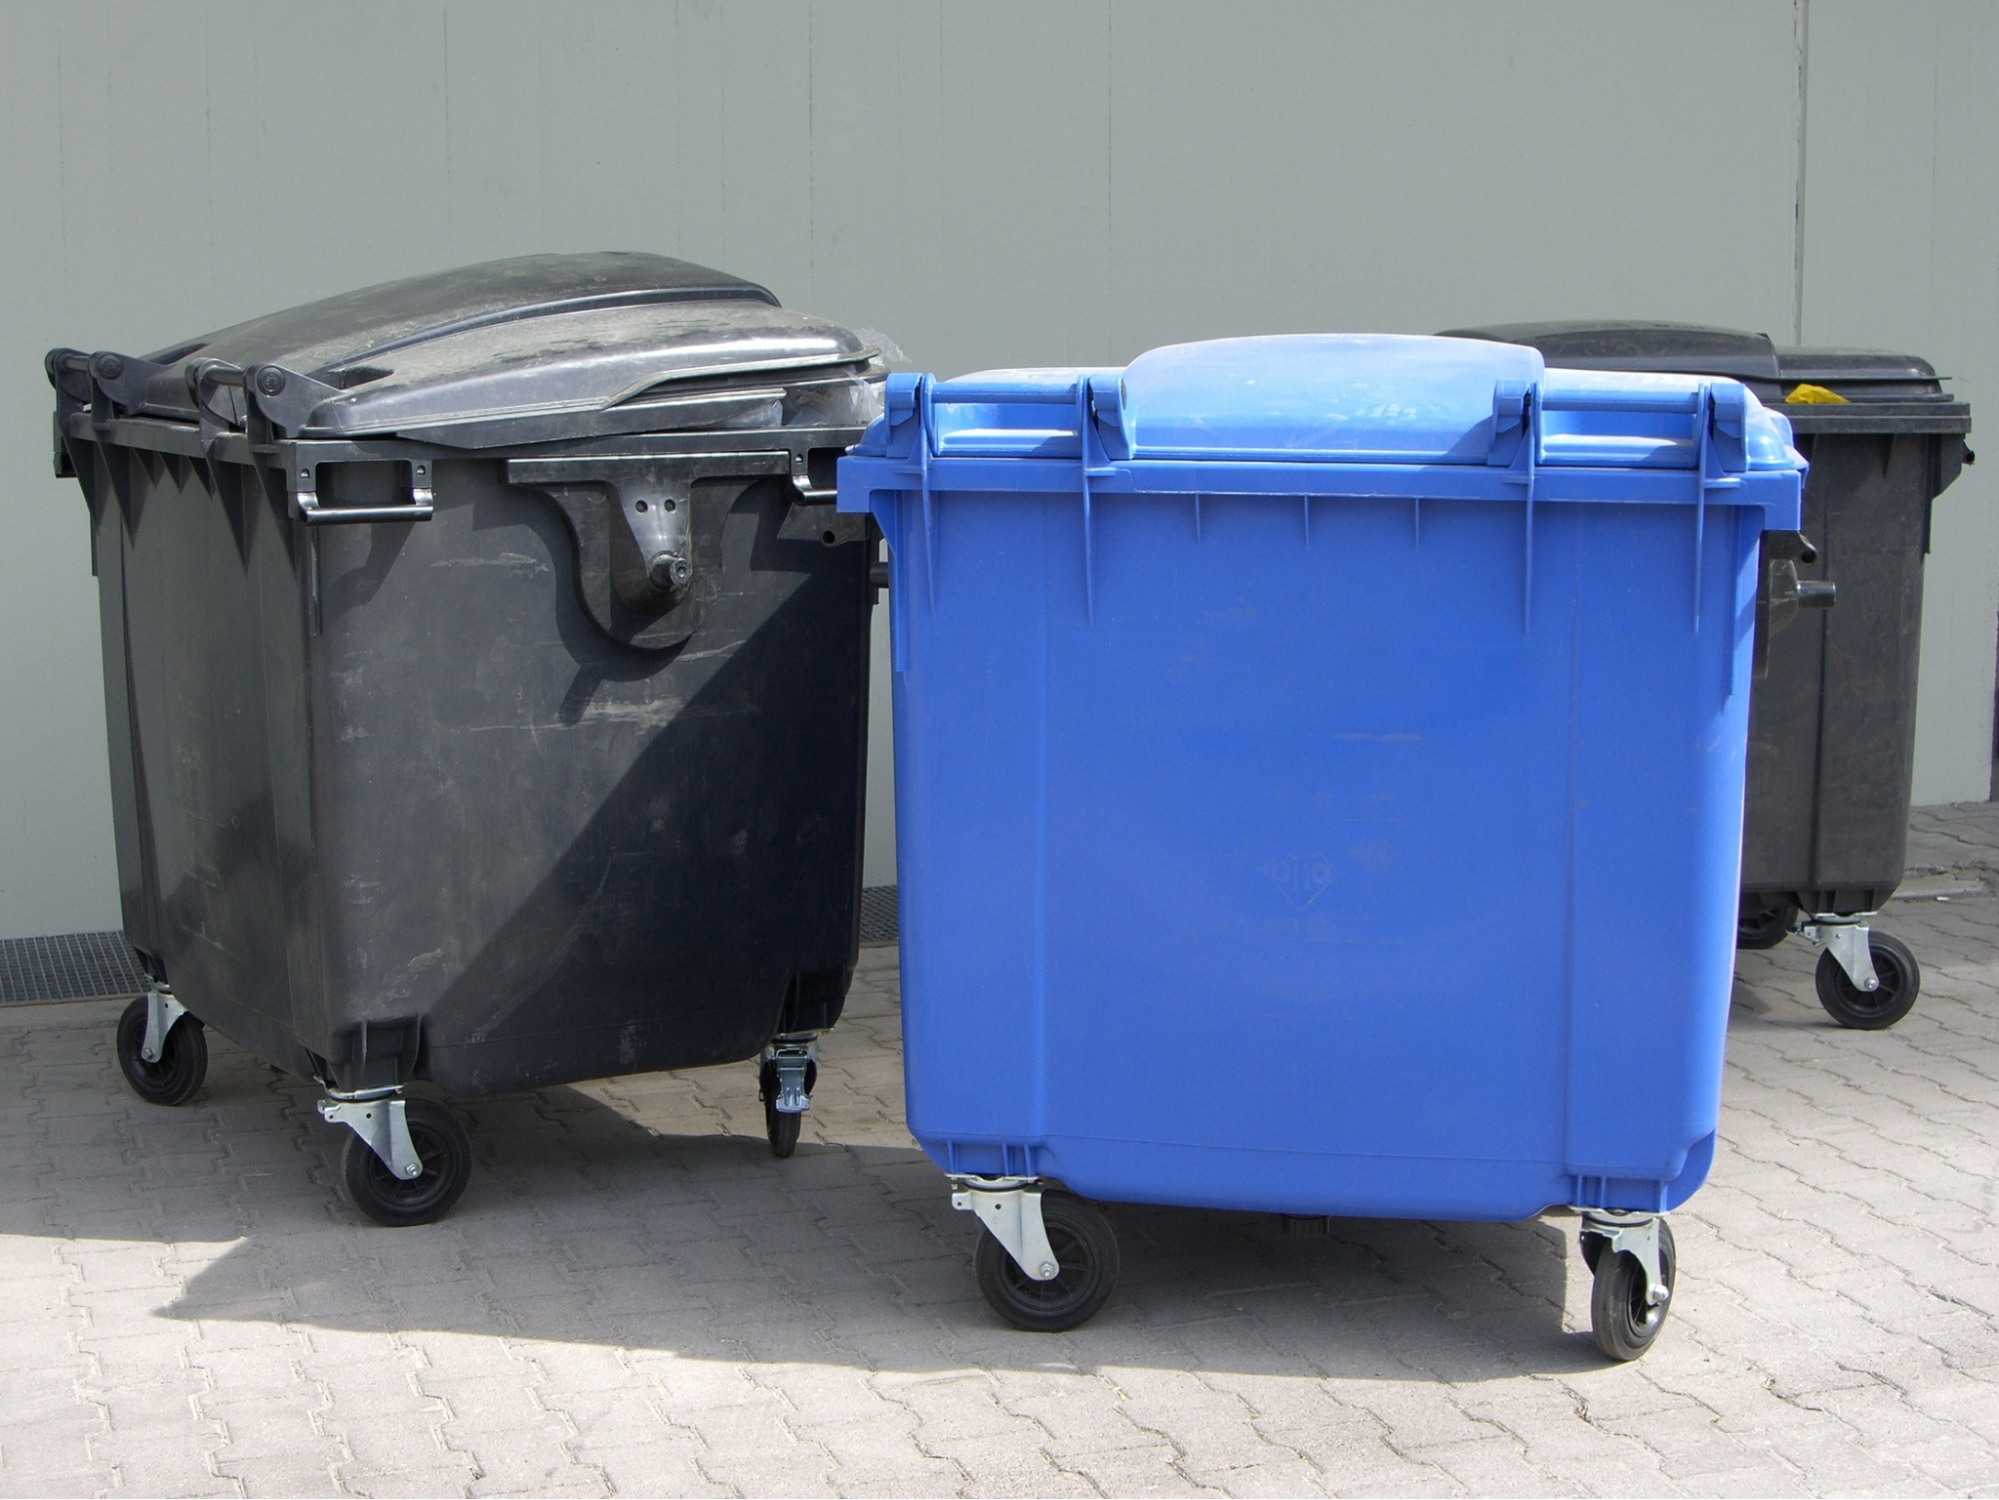 2- Two bin collection system